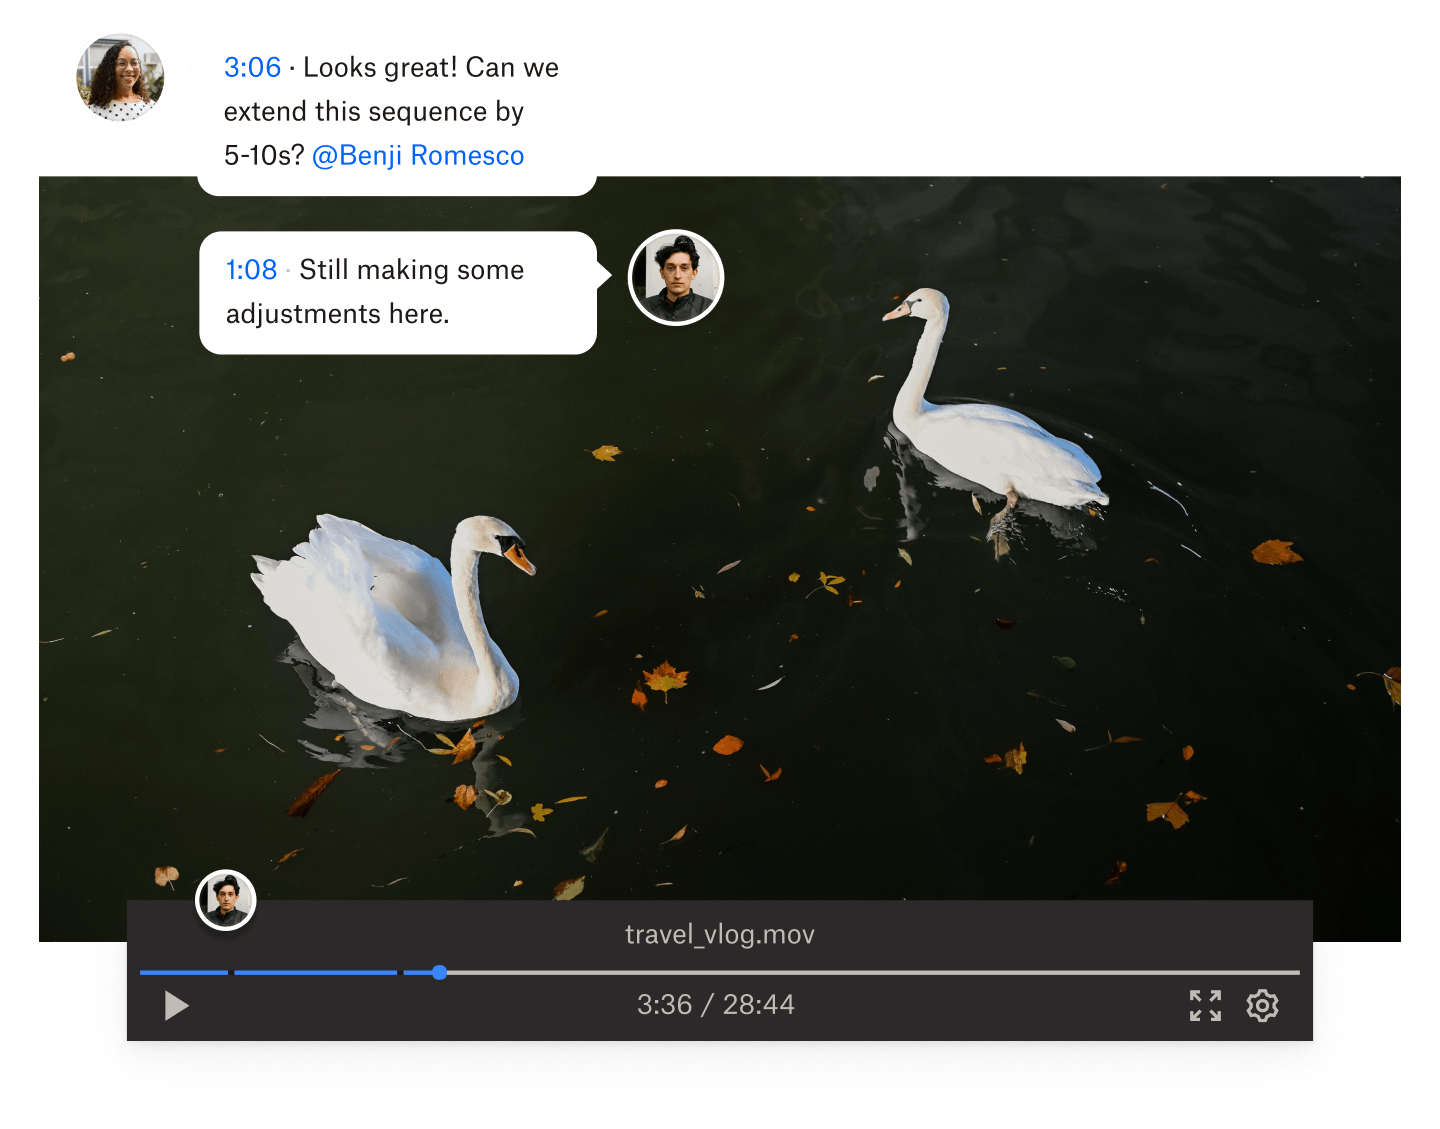 A still from a video of two swans swimming in water with time stamped comments overlayed on the video